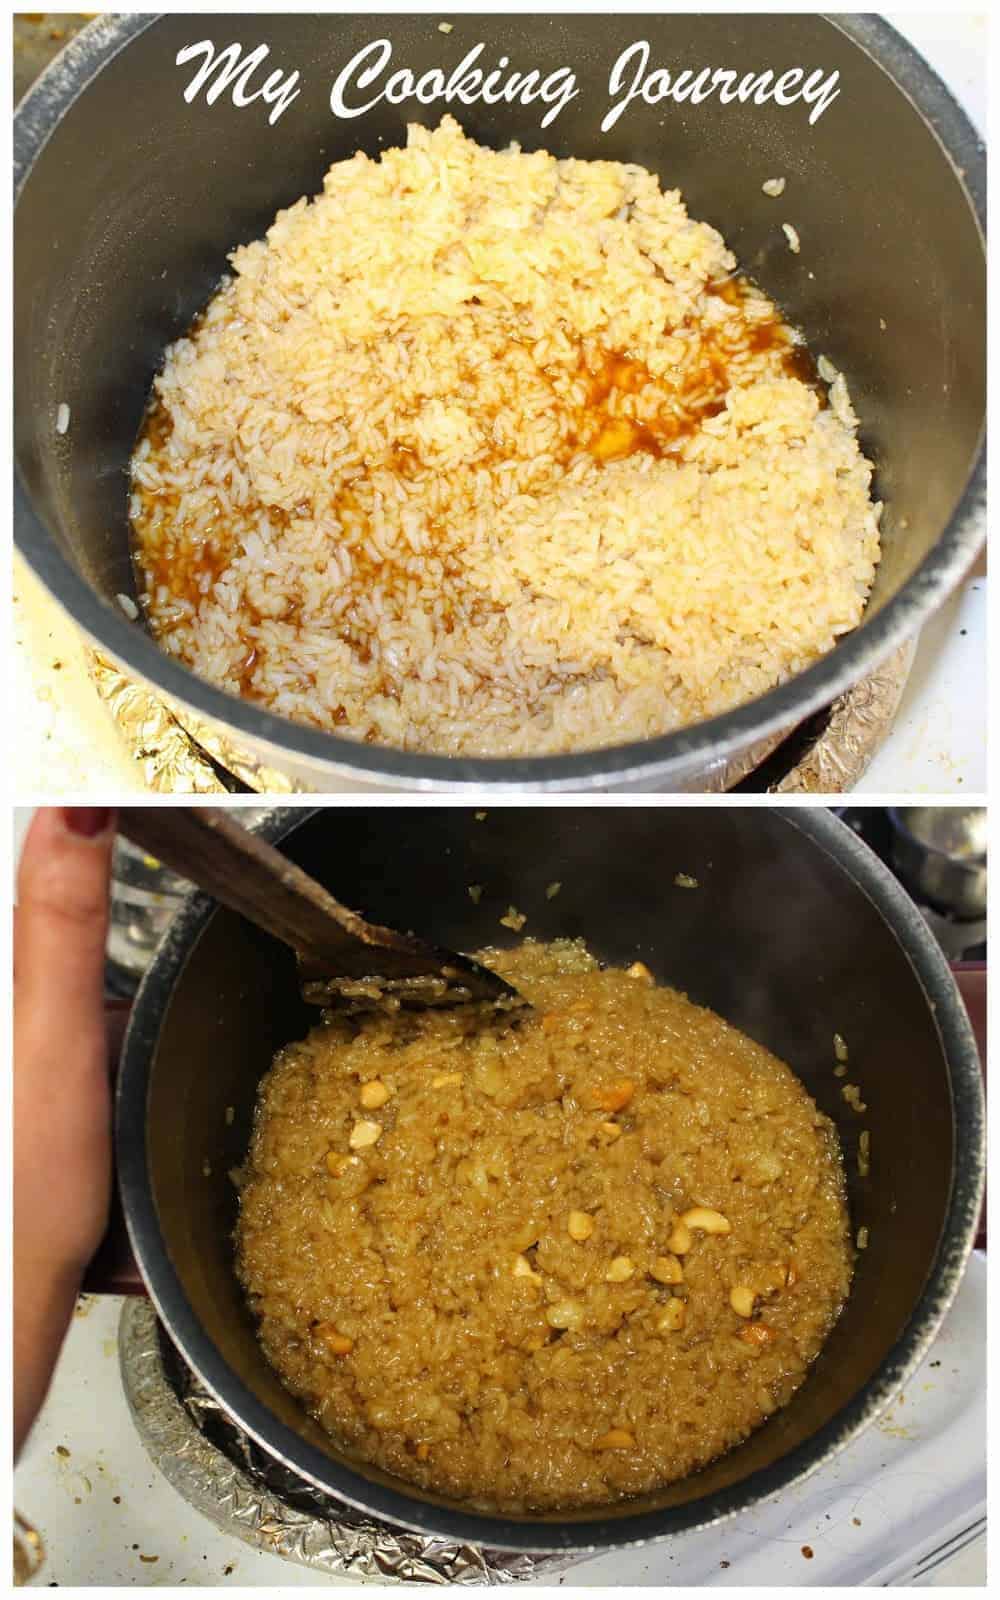 Adding cooked rice to jaggery syrup